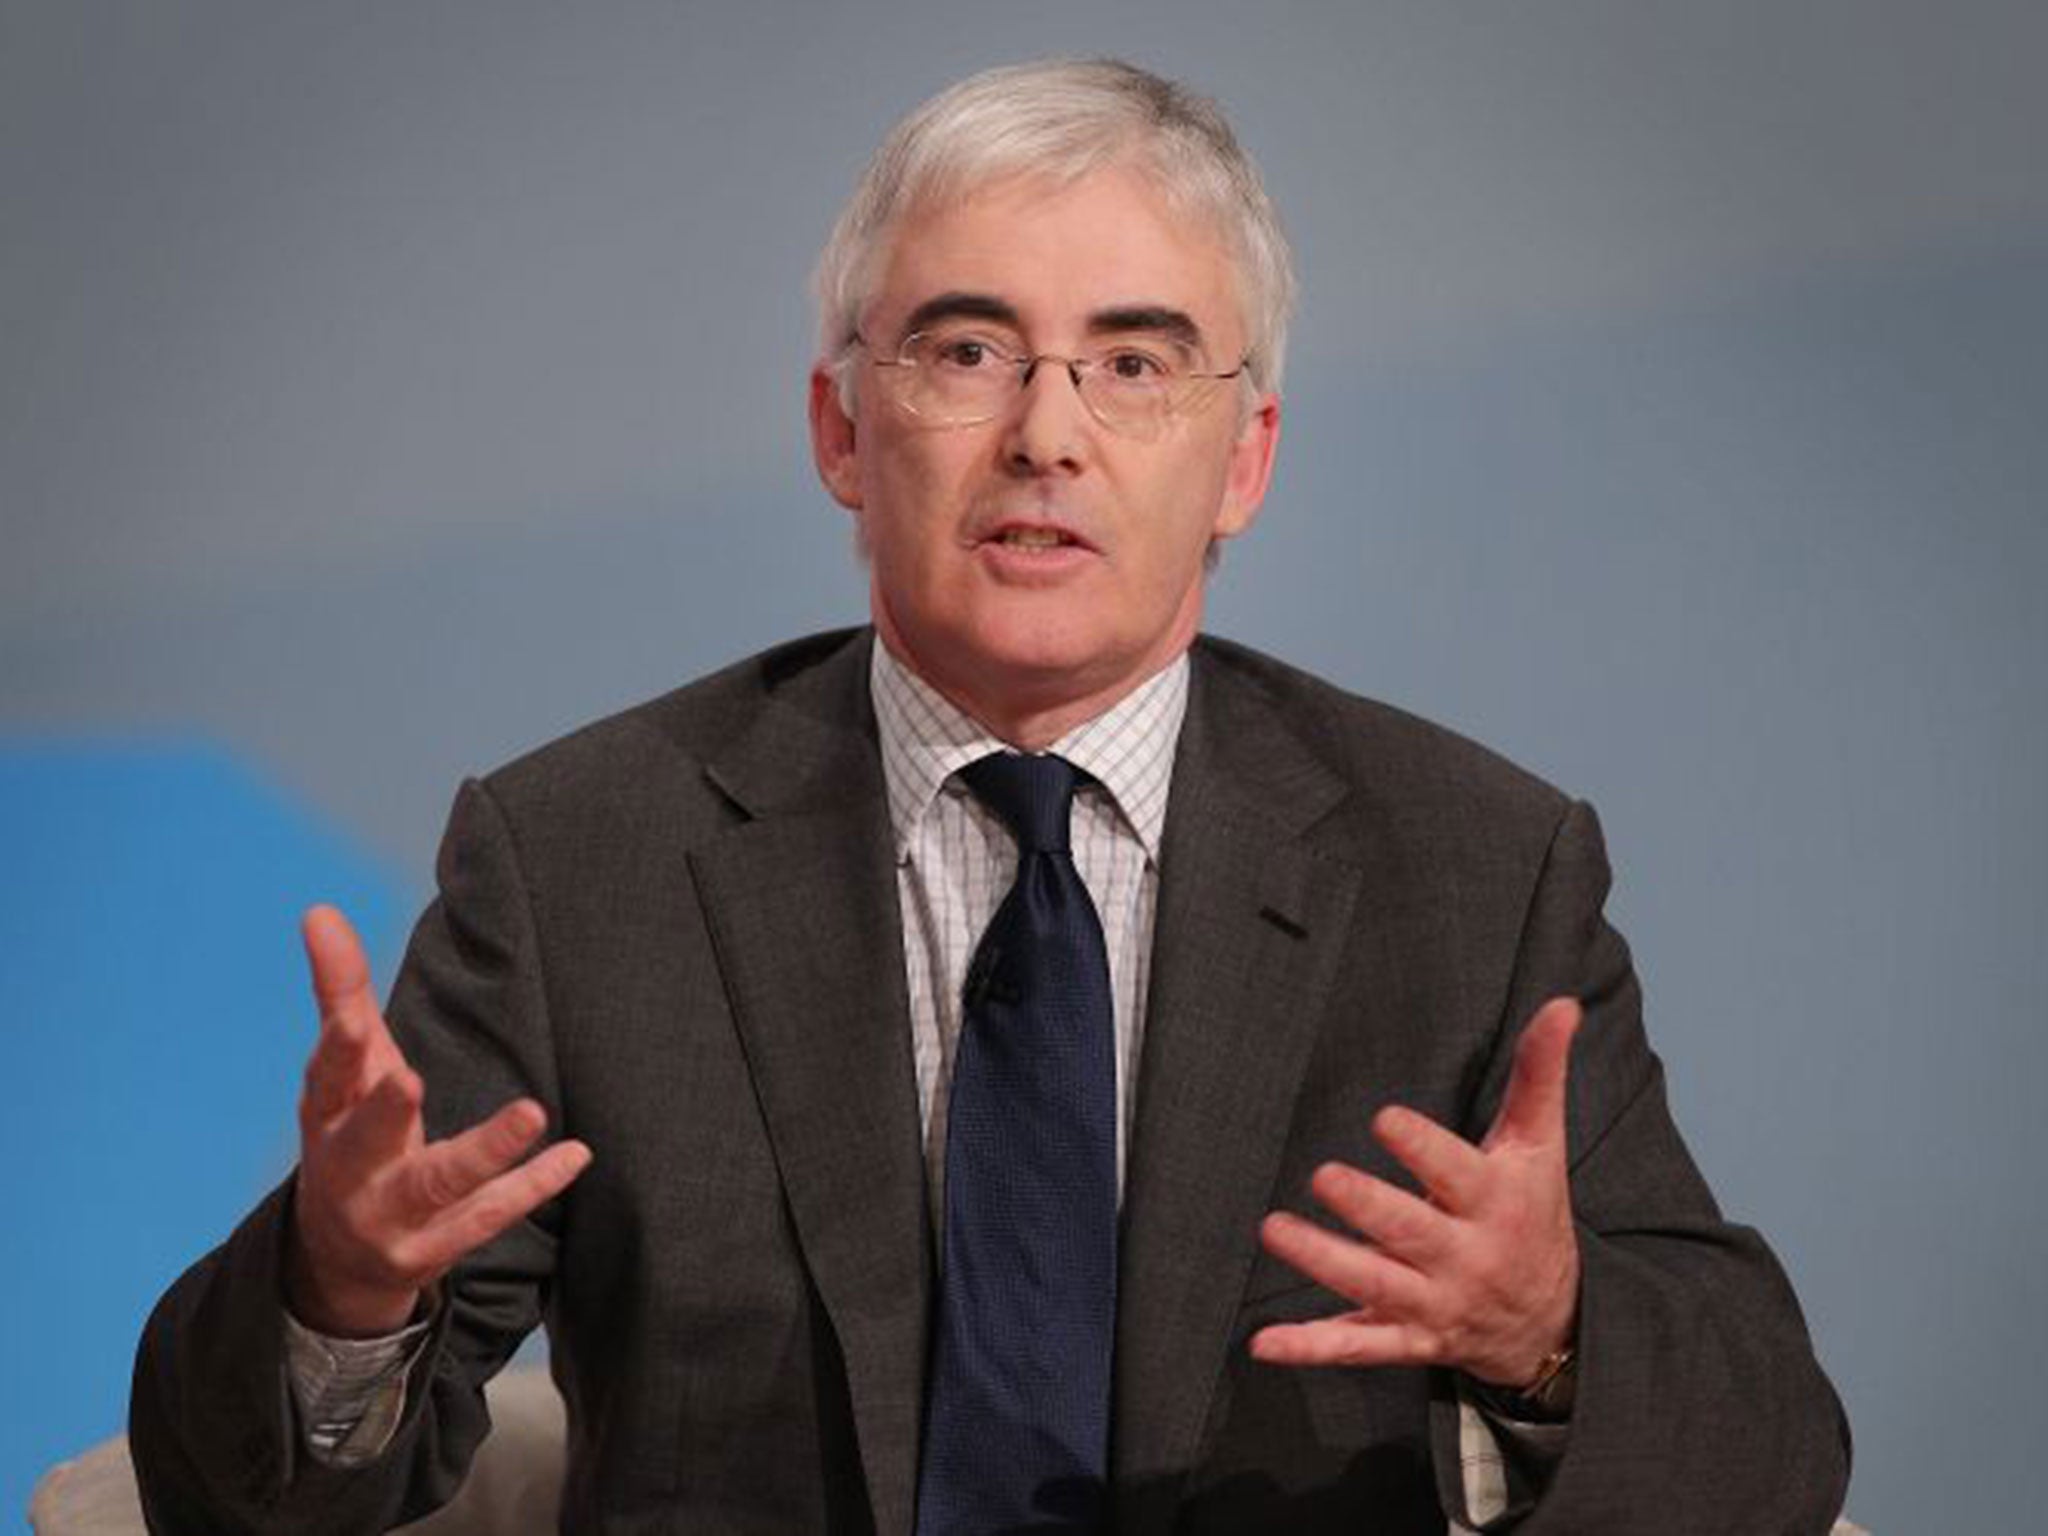 Lord Freud has apologised for his comments